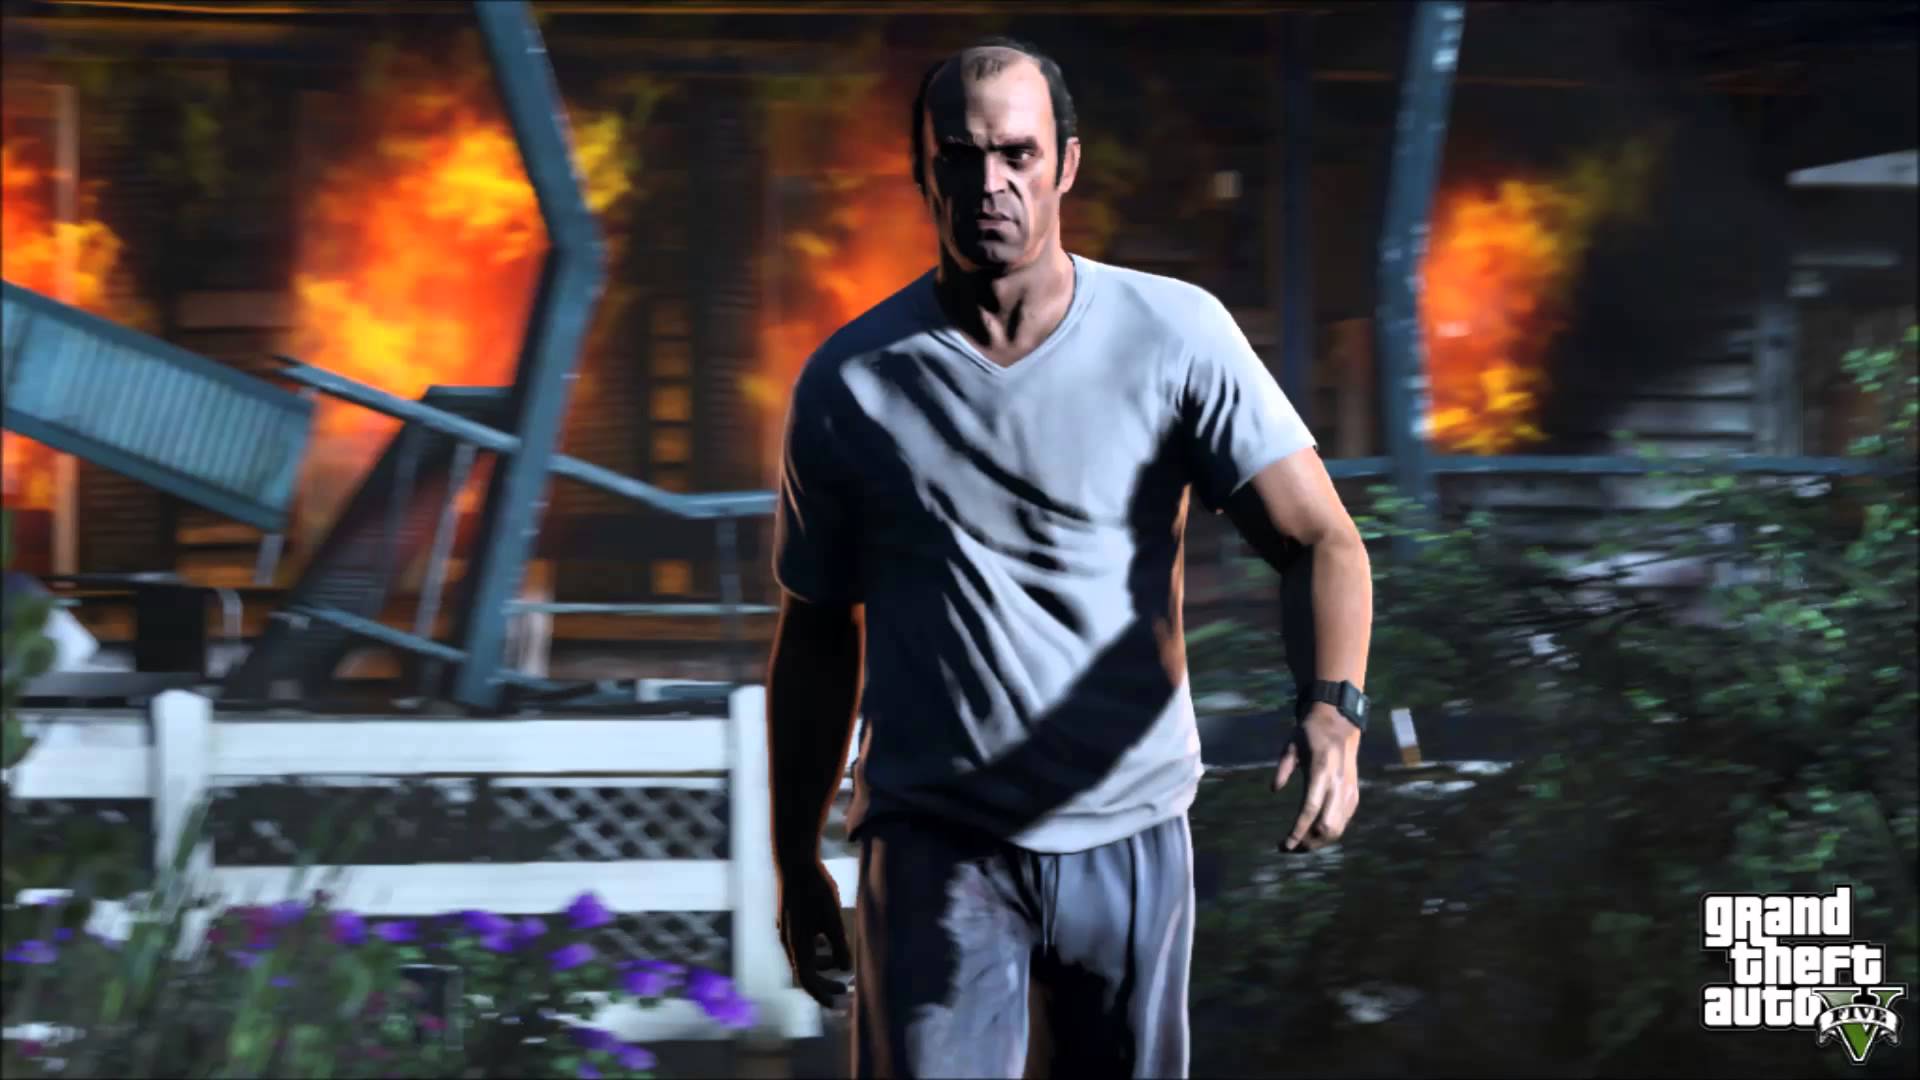 GTA V - 75 Wallpapers Oficiales 1080p - YouTube